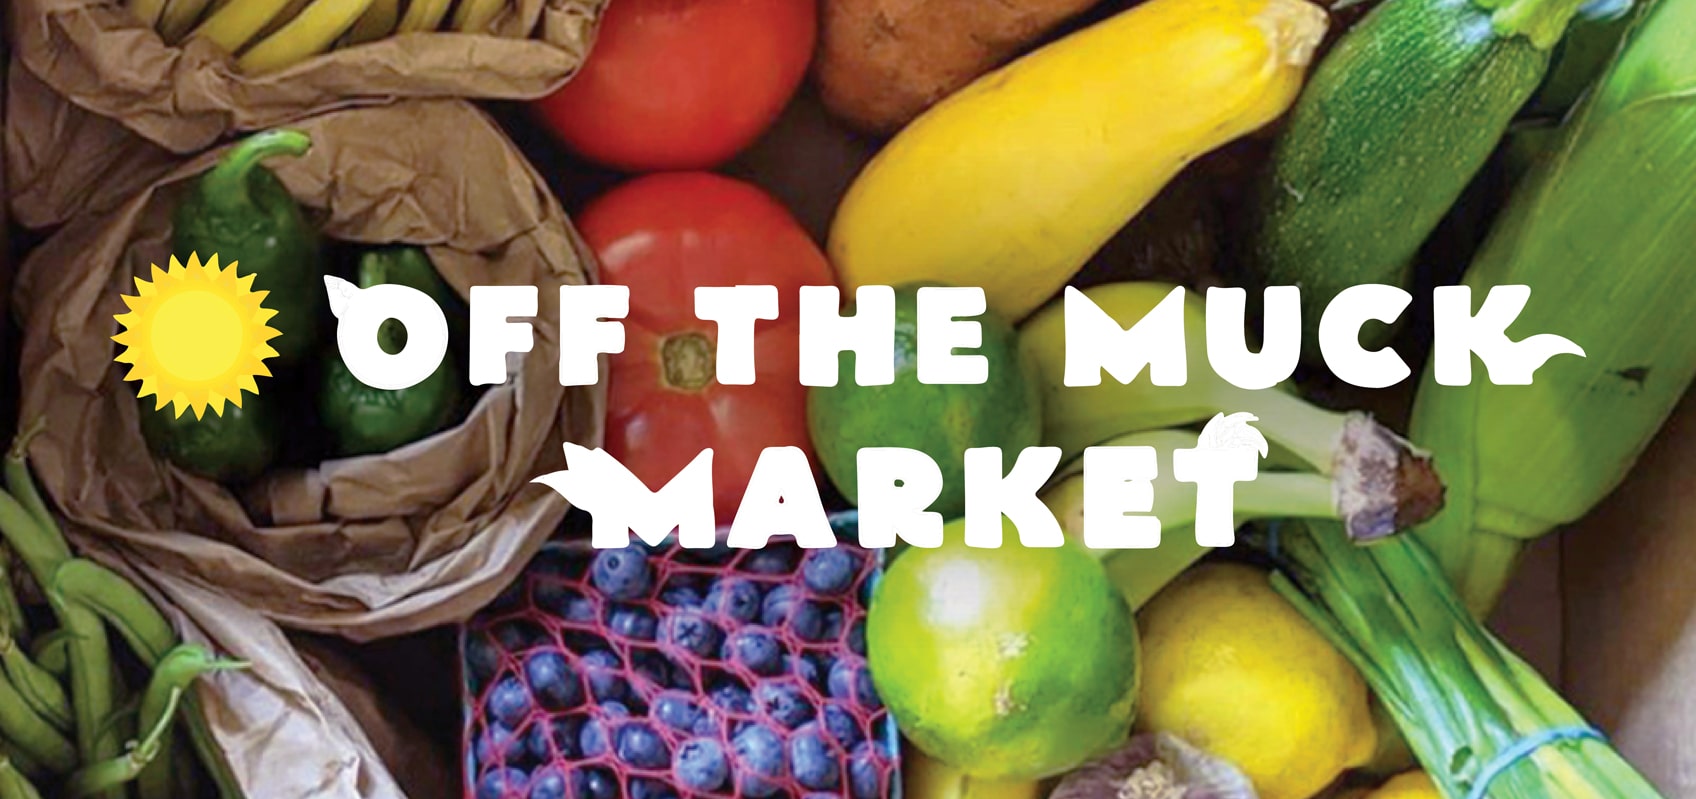 Off the muck market - Box of various fruits and vegetables